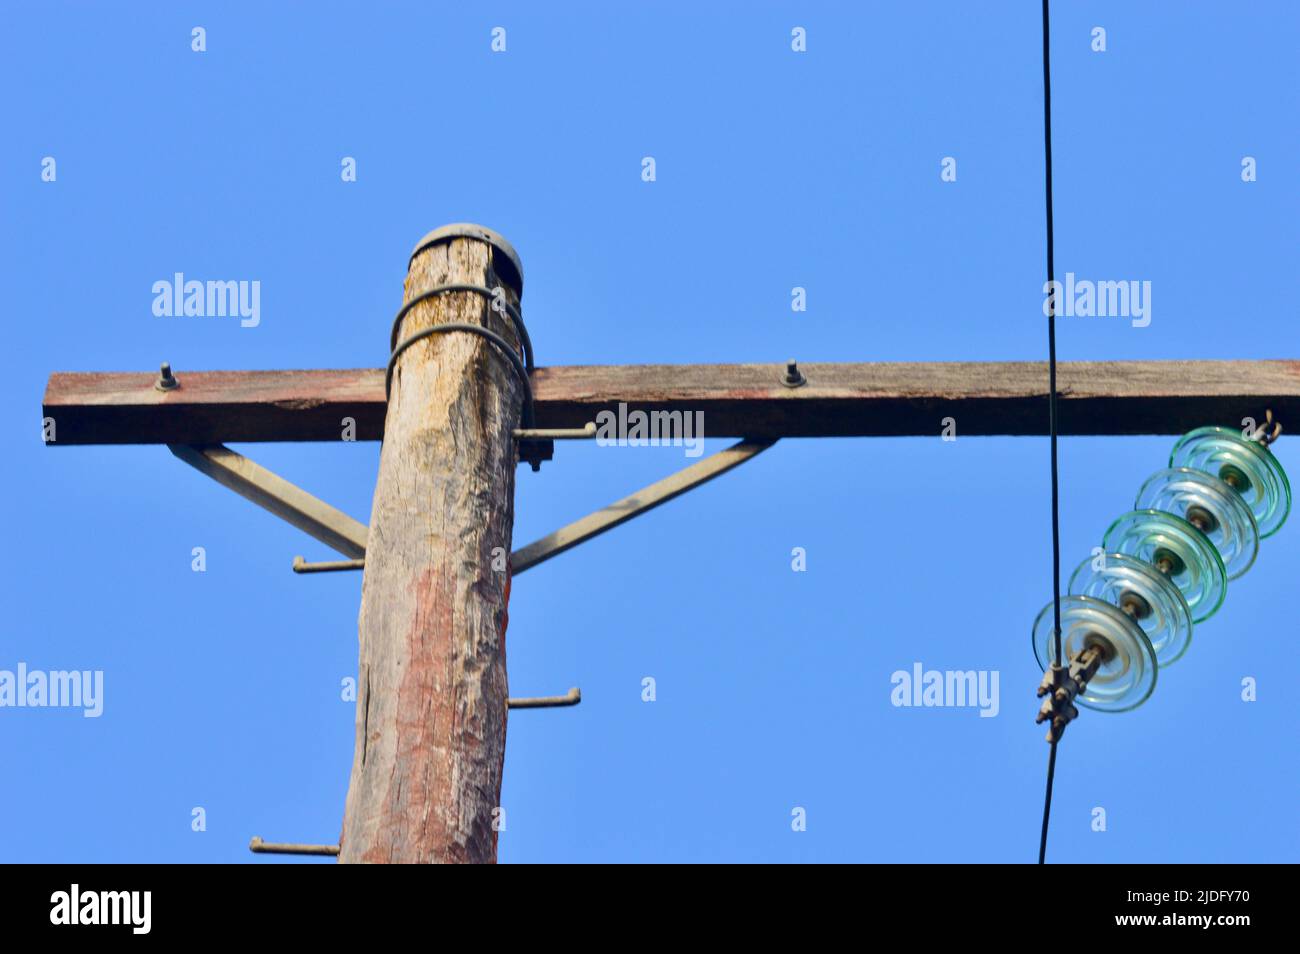 A wooden power pole against a blue sky Stock Photo